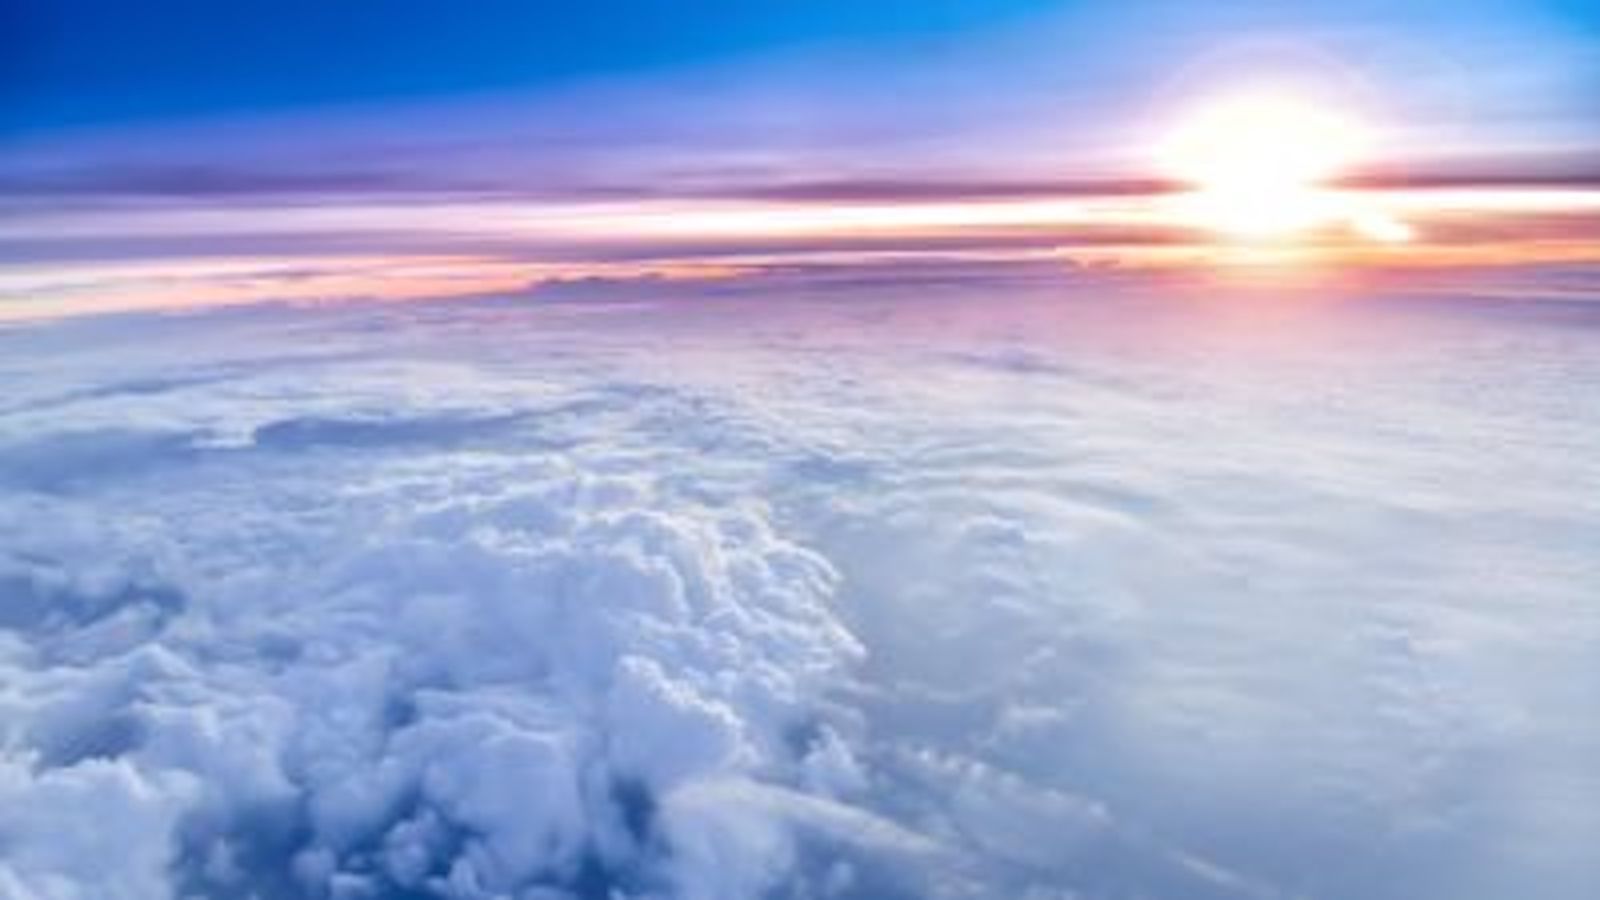 Researchers warn that the additional water vapor in the stratosphere could contribute to global warming or potentially weaken the ozone layer.